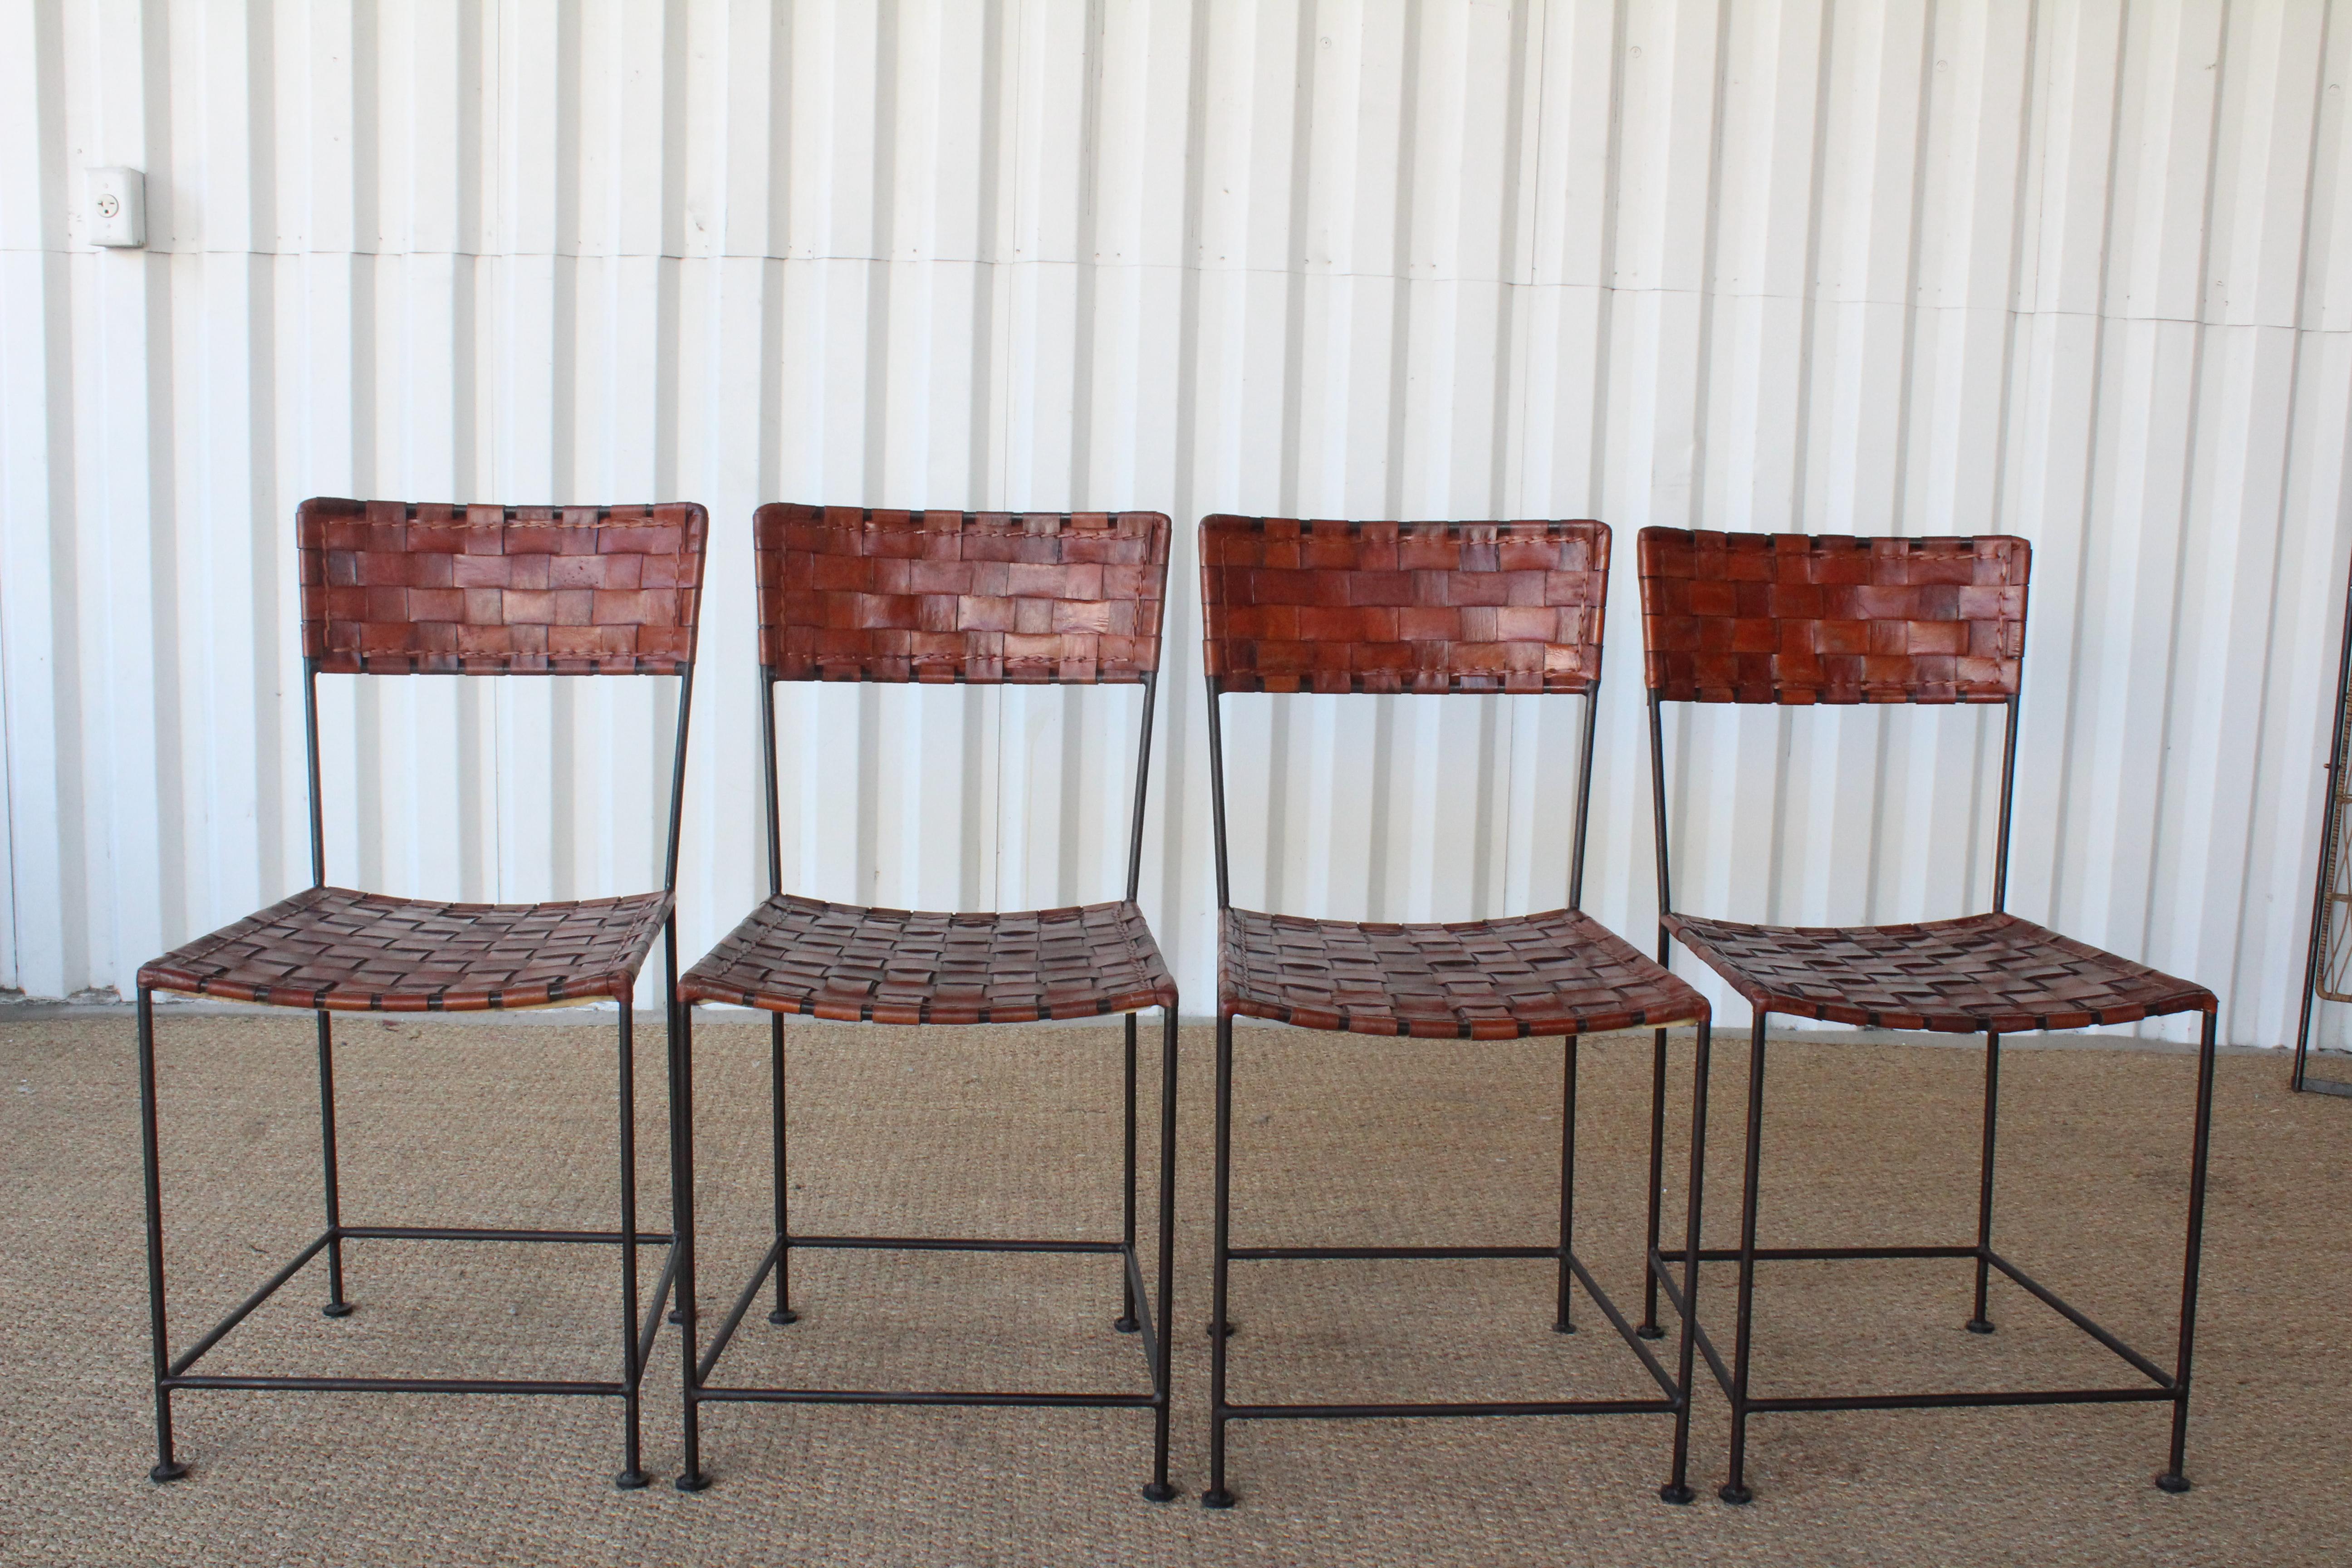 A set of four vintage iron framed dining chairs with leather woven seats, France, 1960s. Each chair is in good condition with the original woven leather backs and seats. Leather shows a beautiful patina. Sold as a set of four.